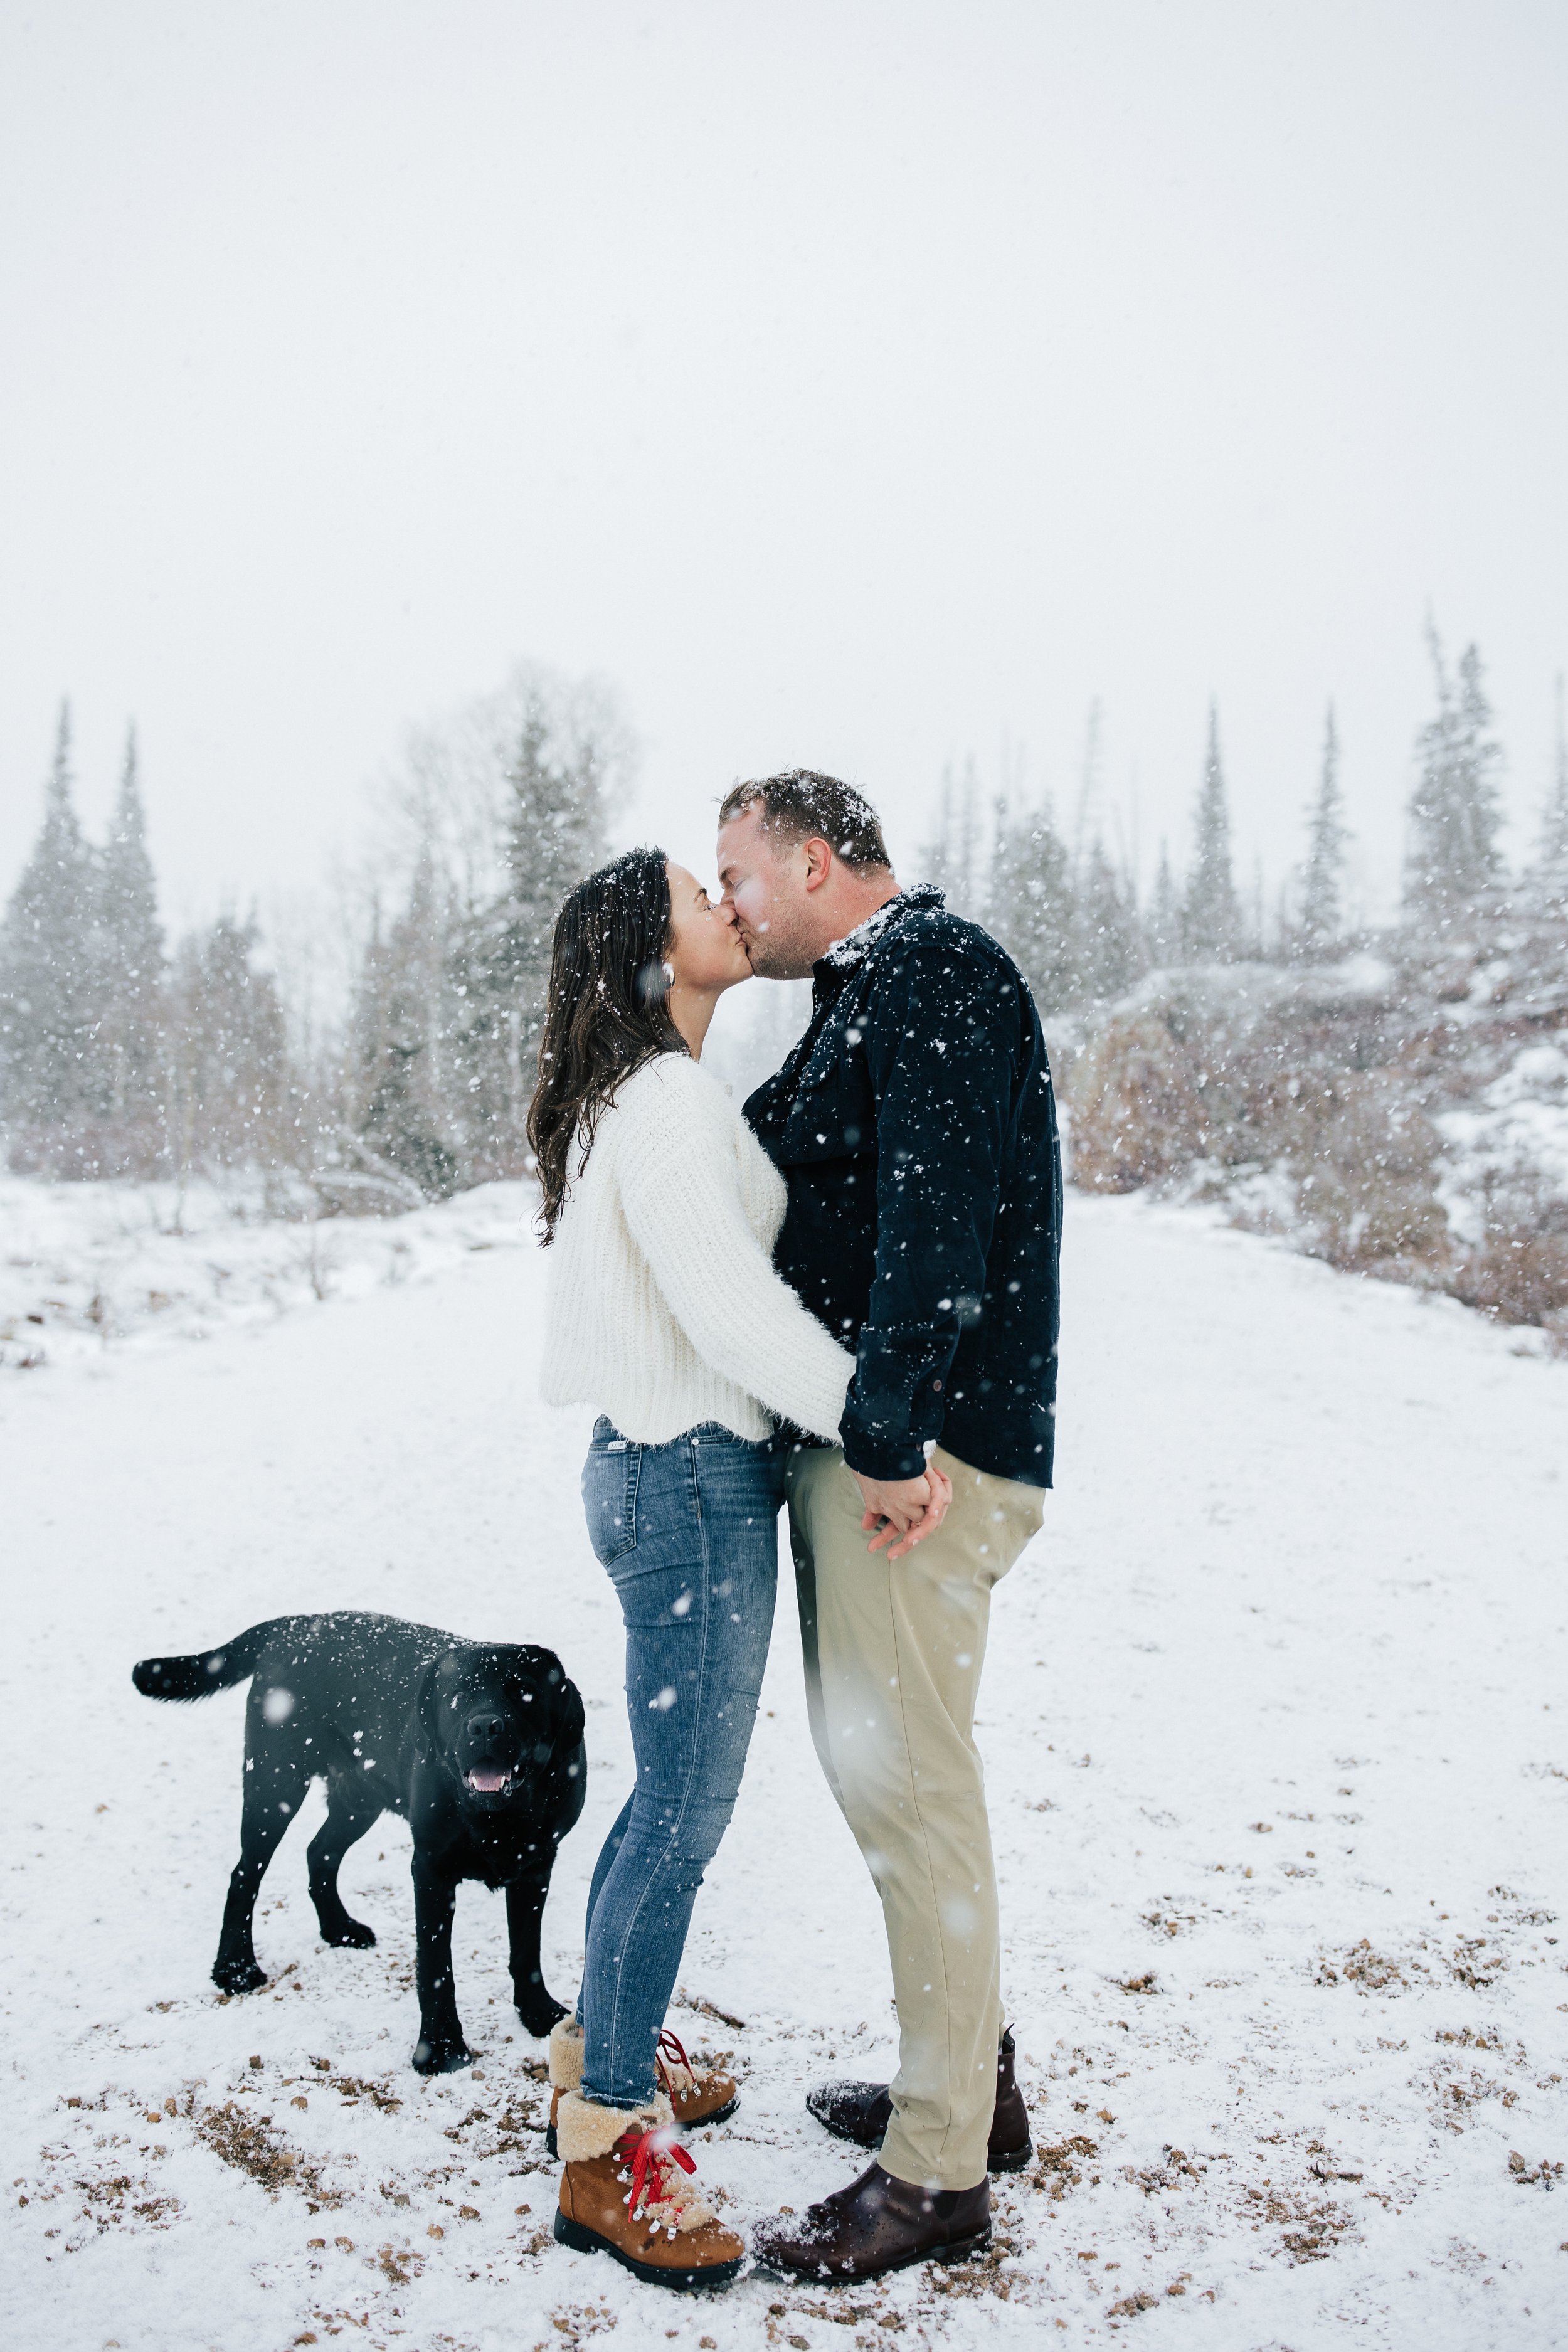  Winter photoshoot outfit inspo man holds his fiance in the mountains around pine trees and snow couples session couple playing in the snow winter engagement session #winteroutfitinspo #outfitinspo #winteroutfits #winterphotoshoot a couple kisses wit